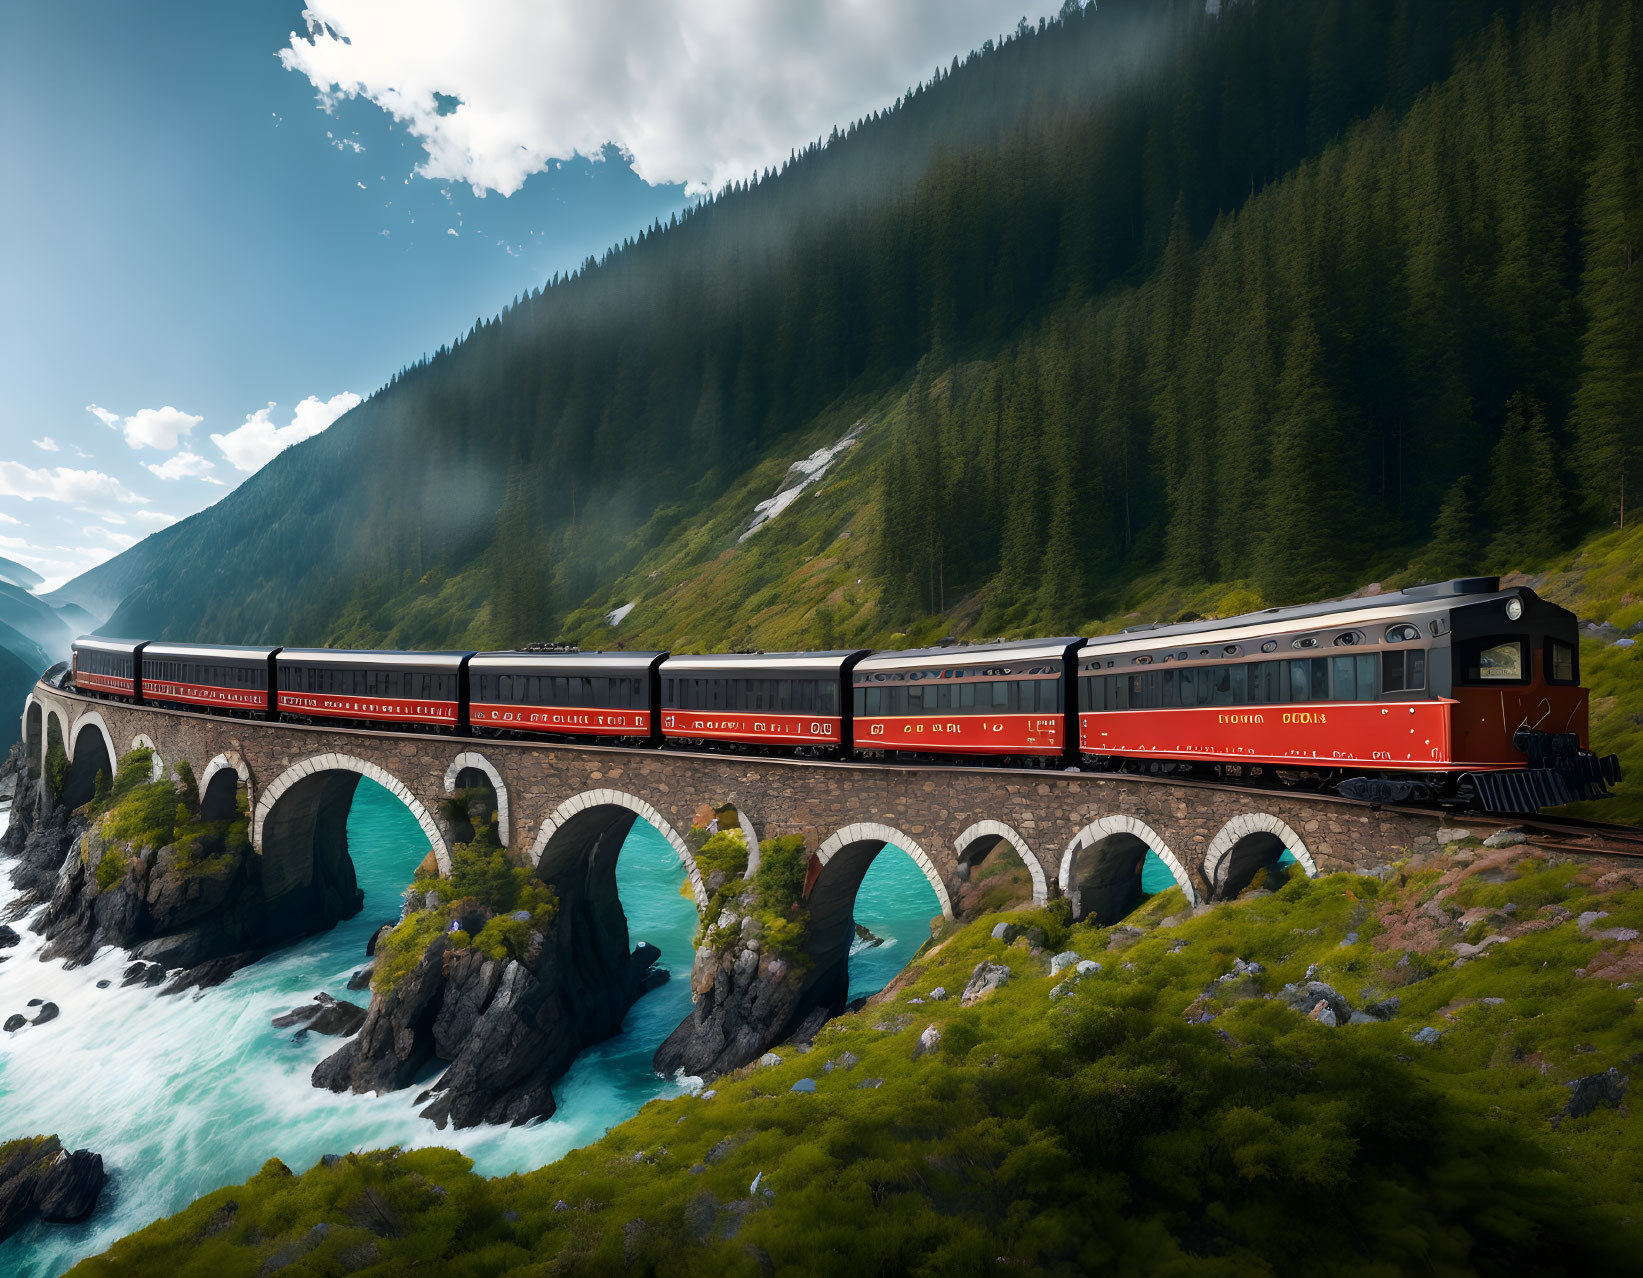 Red train crossing viaduct over turquoise river in forested hills under blue sky.